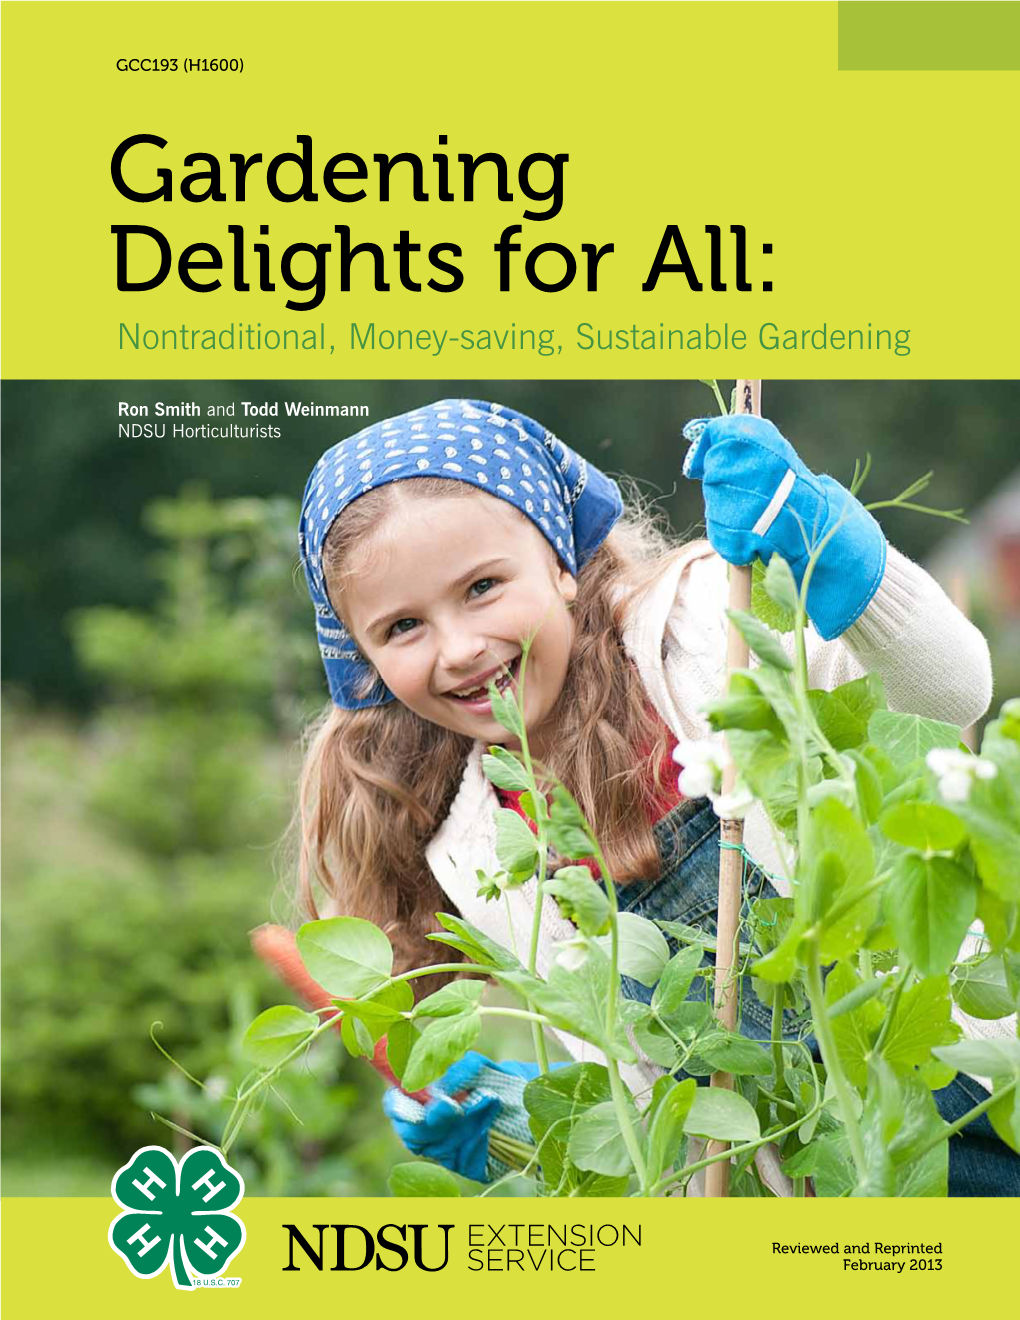 Gardening Delights for All: Nontraditional, Money-Saving, Sustainable Gardening